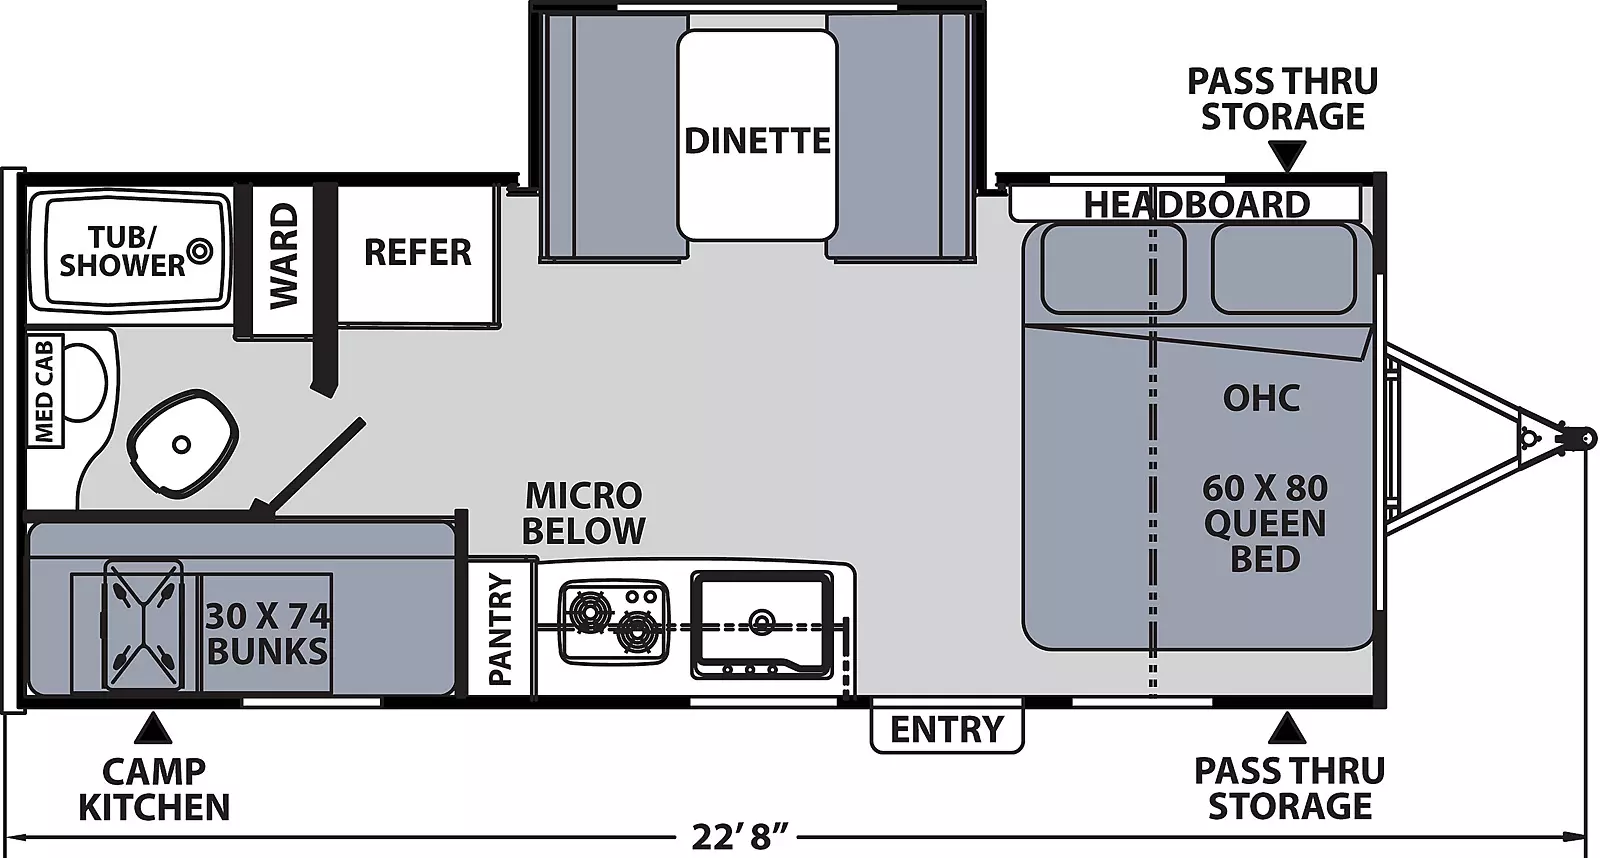 The 194BHS has one slide out on the off-door side and one entry door on the door side. Interior layout from front to back: front bedroom with side-facing queen bed and overhead cabinet; kitchen living dining with off-door side slide out containing dinette; door side kitchen containing sink, cook top stove, overhead cabinet, microwave below, and pantry; refrigerator on the off-door side; off door side bathroom and wardrobe. Two bunk beds on the door side.